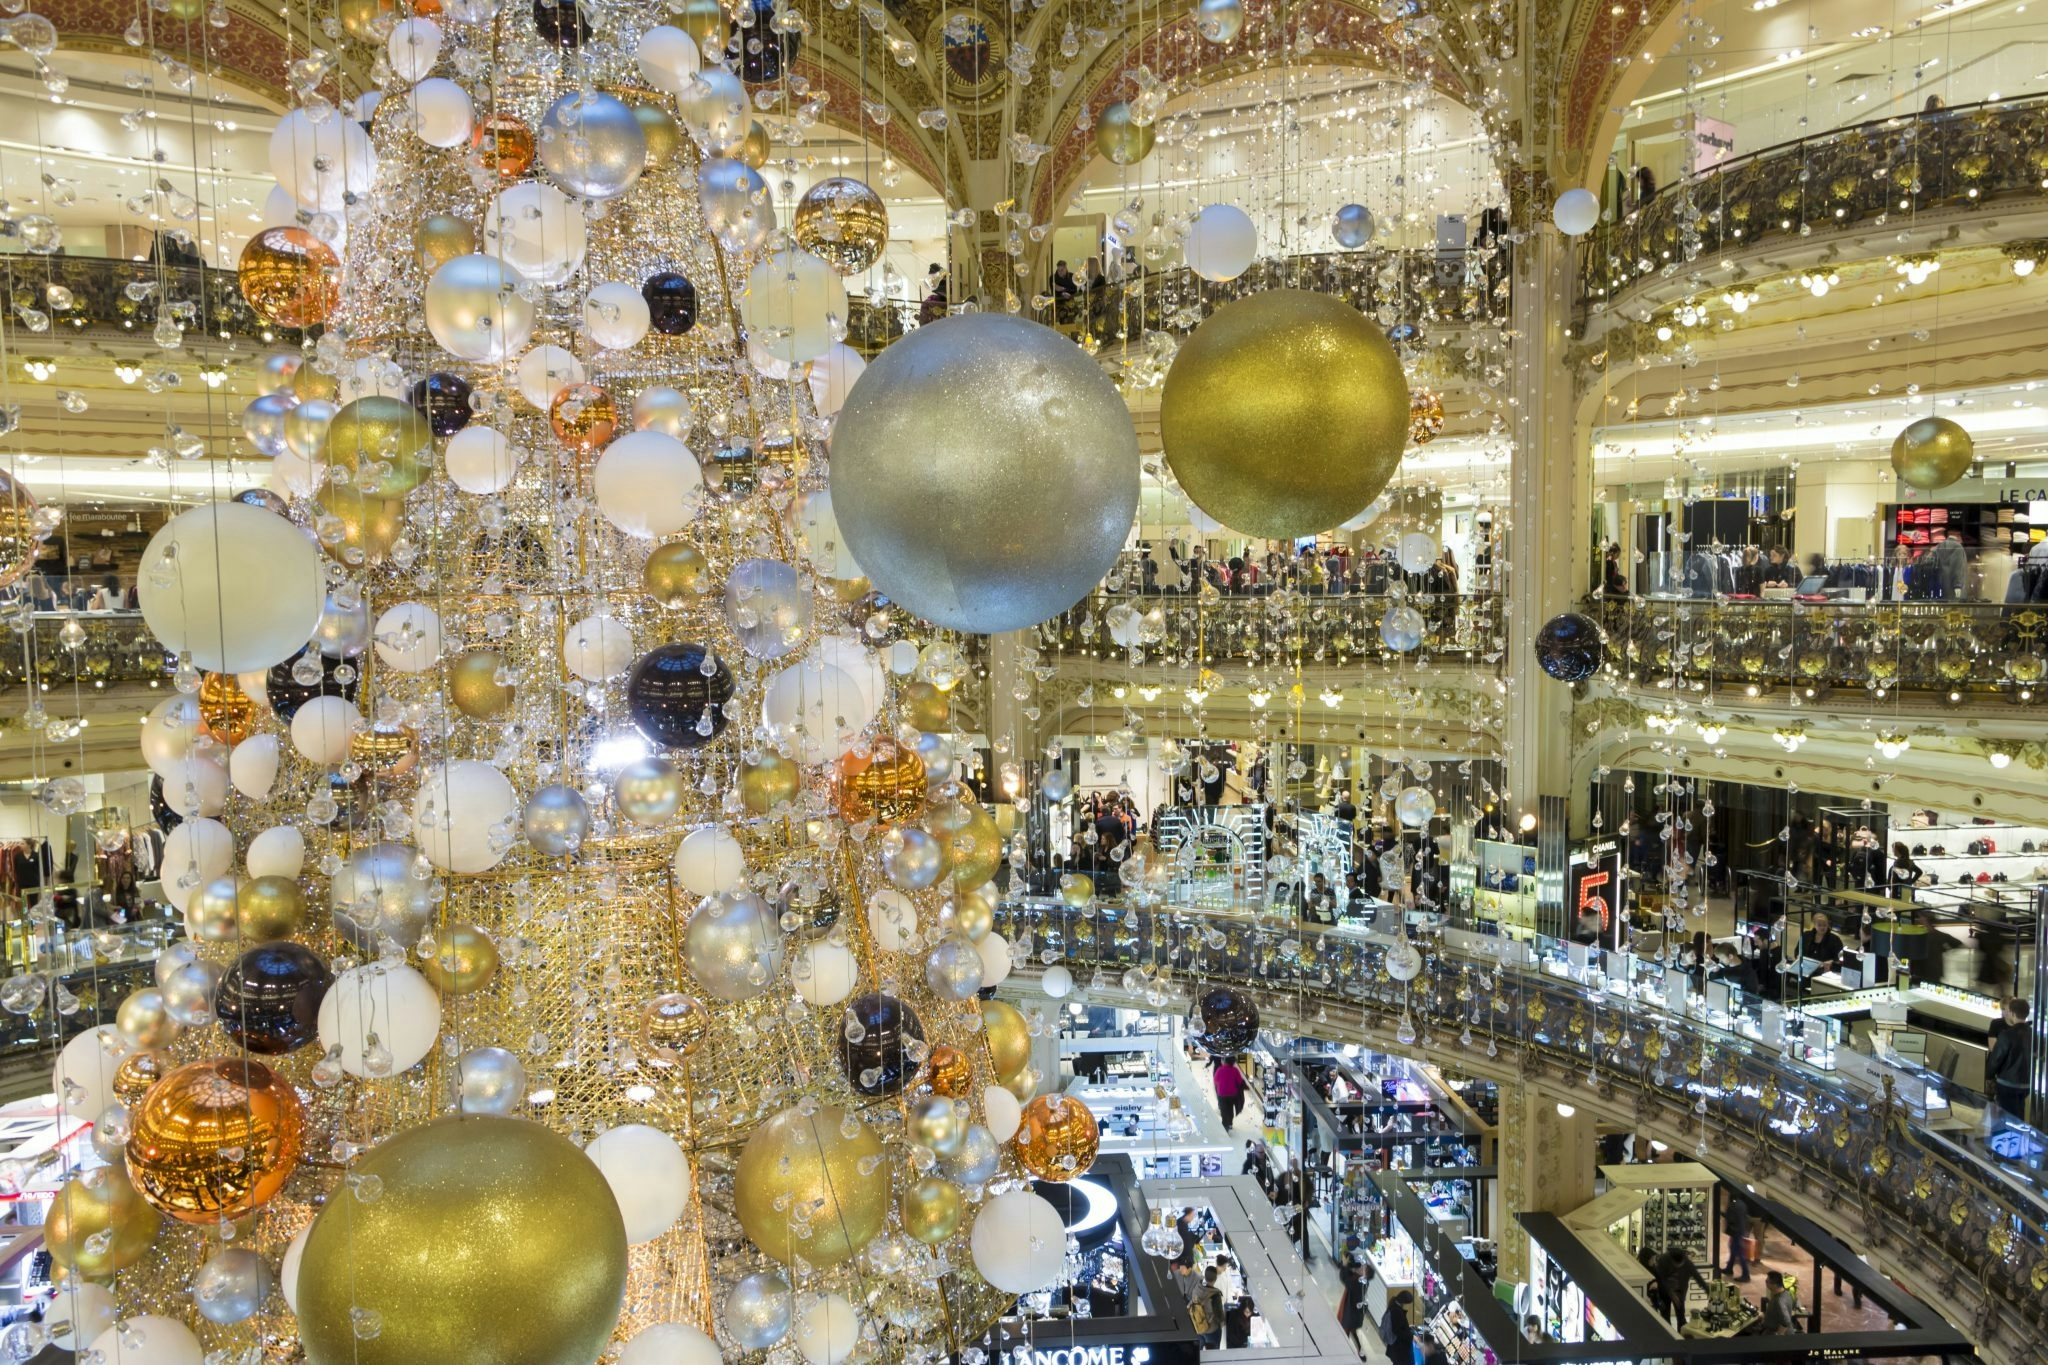 WeChat Pay is now accepted at two Parisian department stores of the Galeries Lafayette group, Galeries Lafayette Haussmann and BHV Marais. Photo: Petr Kovalenkov / Shutterstock